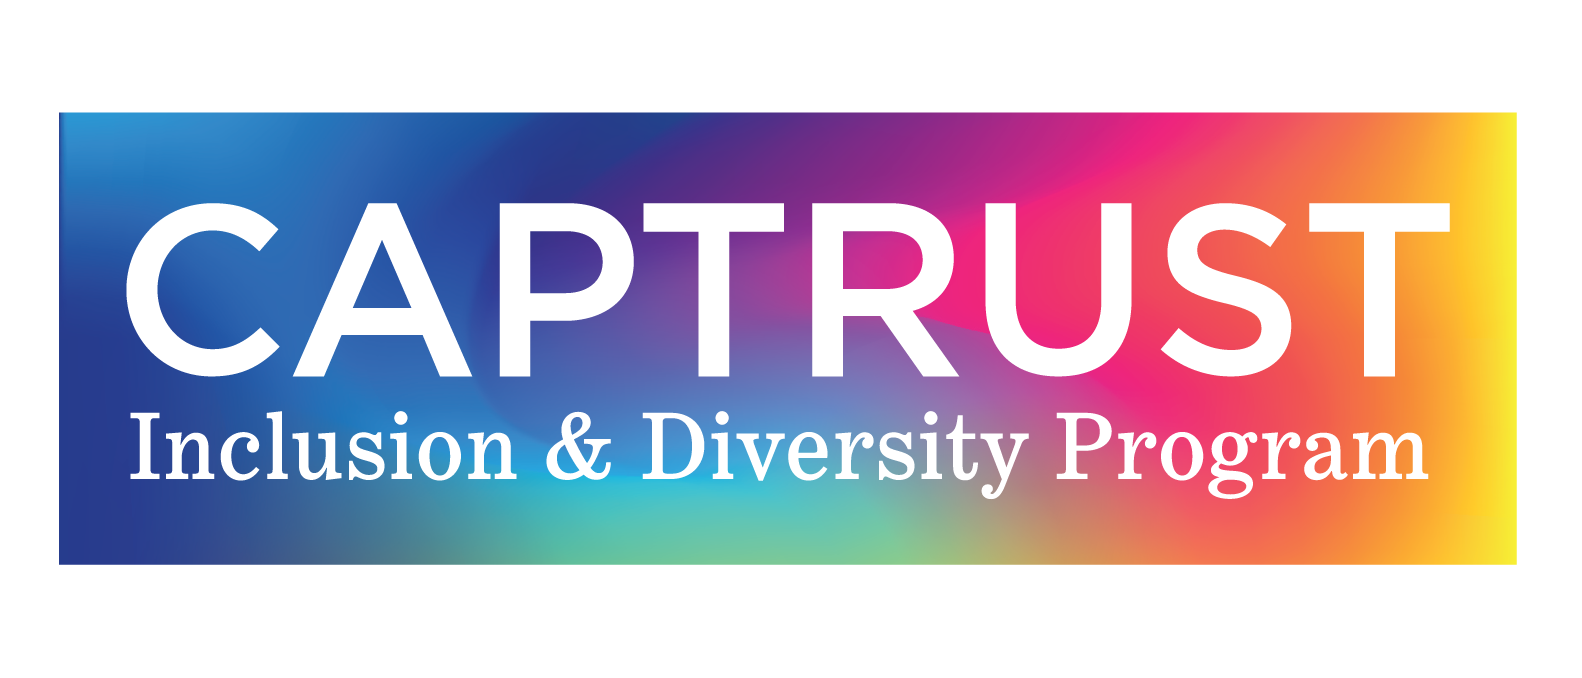 CAPTRUST Inclusion & Diversity (Runner-up in contest)